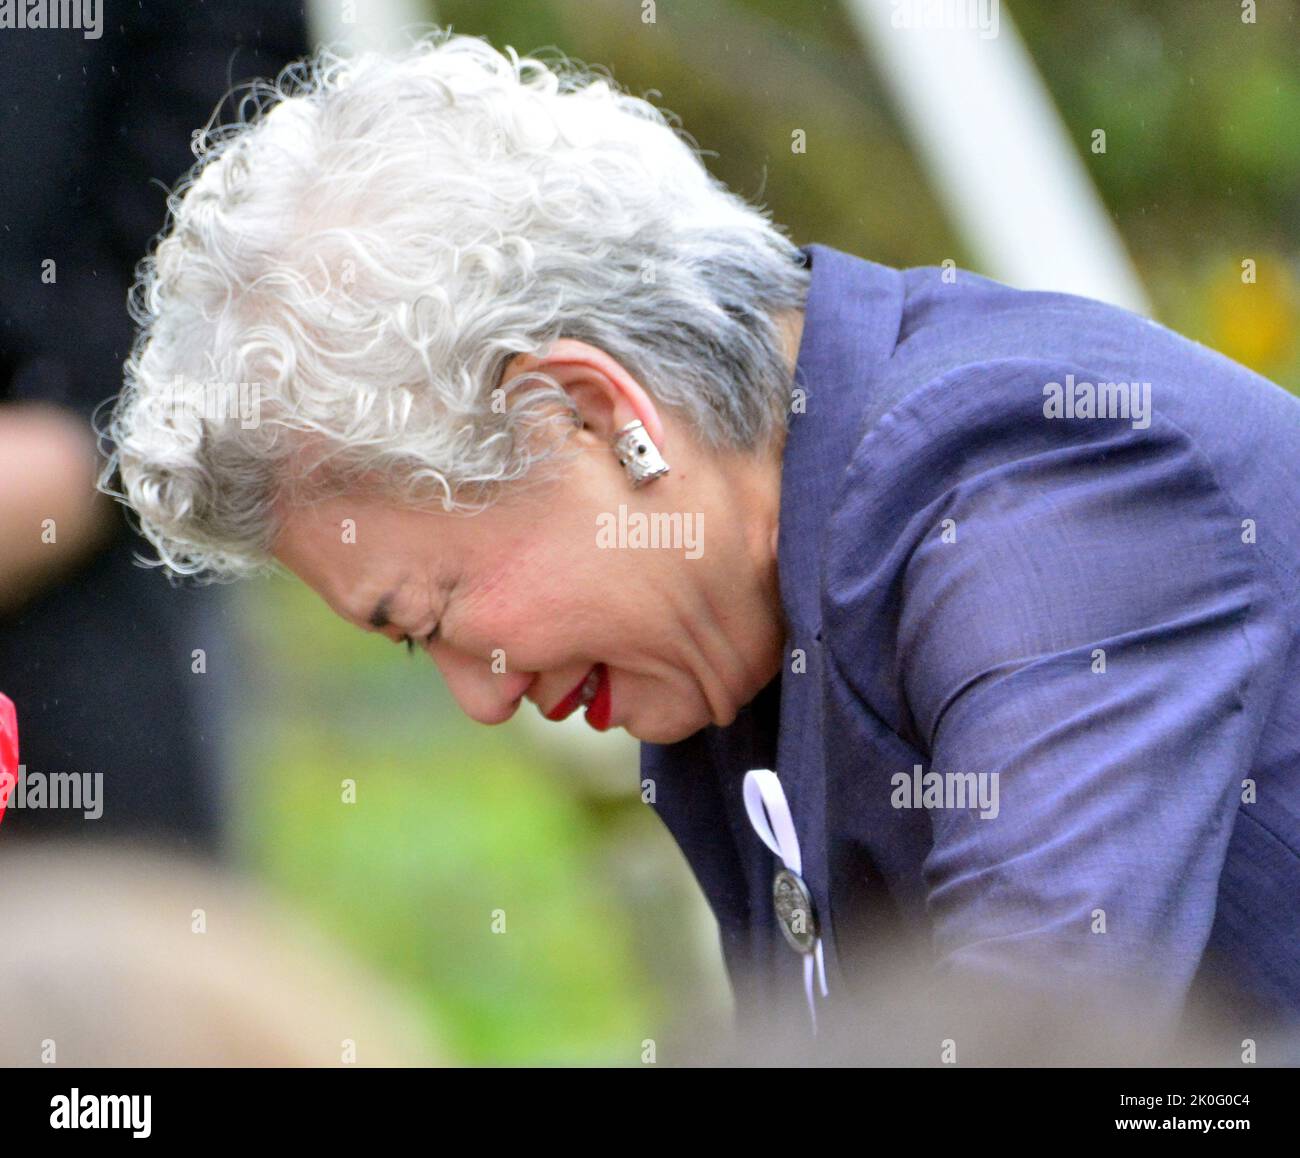 Shanksville, United States. 10th Sep, 2022. Yachiyo Kuge of Osaka Japan, who's son was a victim of the Flight 93 crash cries after saying his name during the ringing of the Bells during the 21th Annual Remembrance Ceremony at the Flight 93 National Memorial on Sunday, September 11, 2022 near Shanksville, Pennsylvania . Photo by Archie Carpenter/UPI Credit: UPI/Alamy Live News Stock Photo